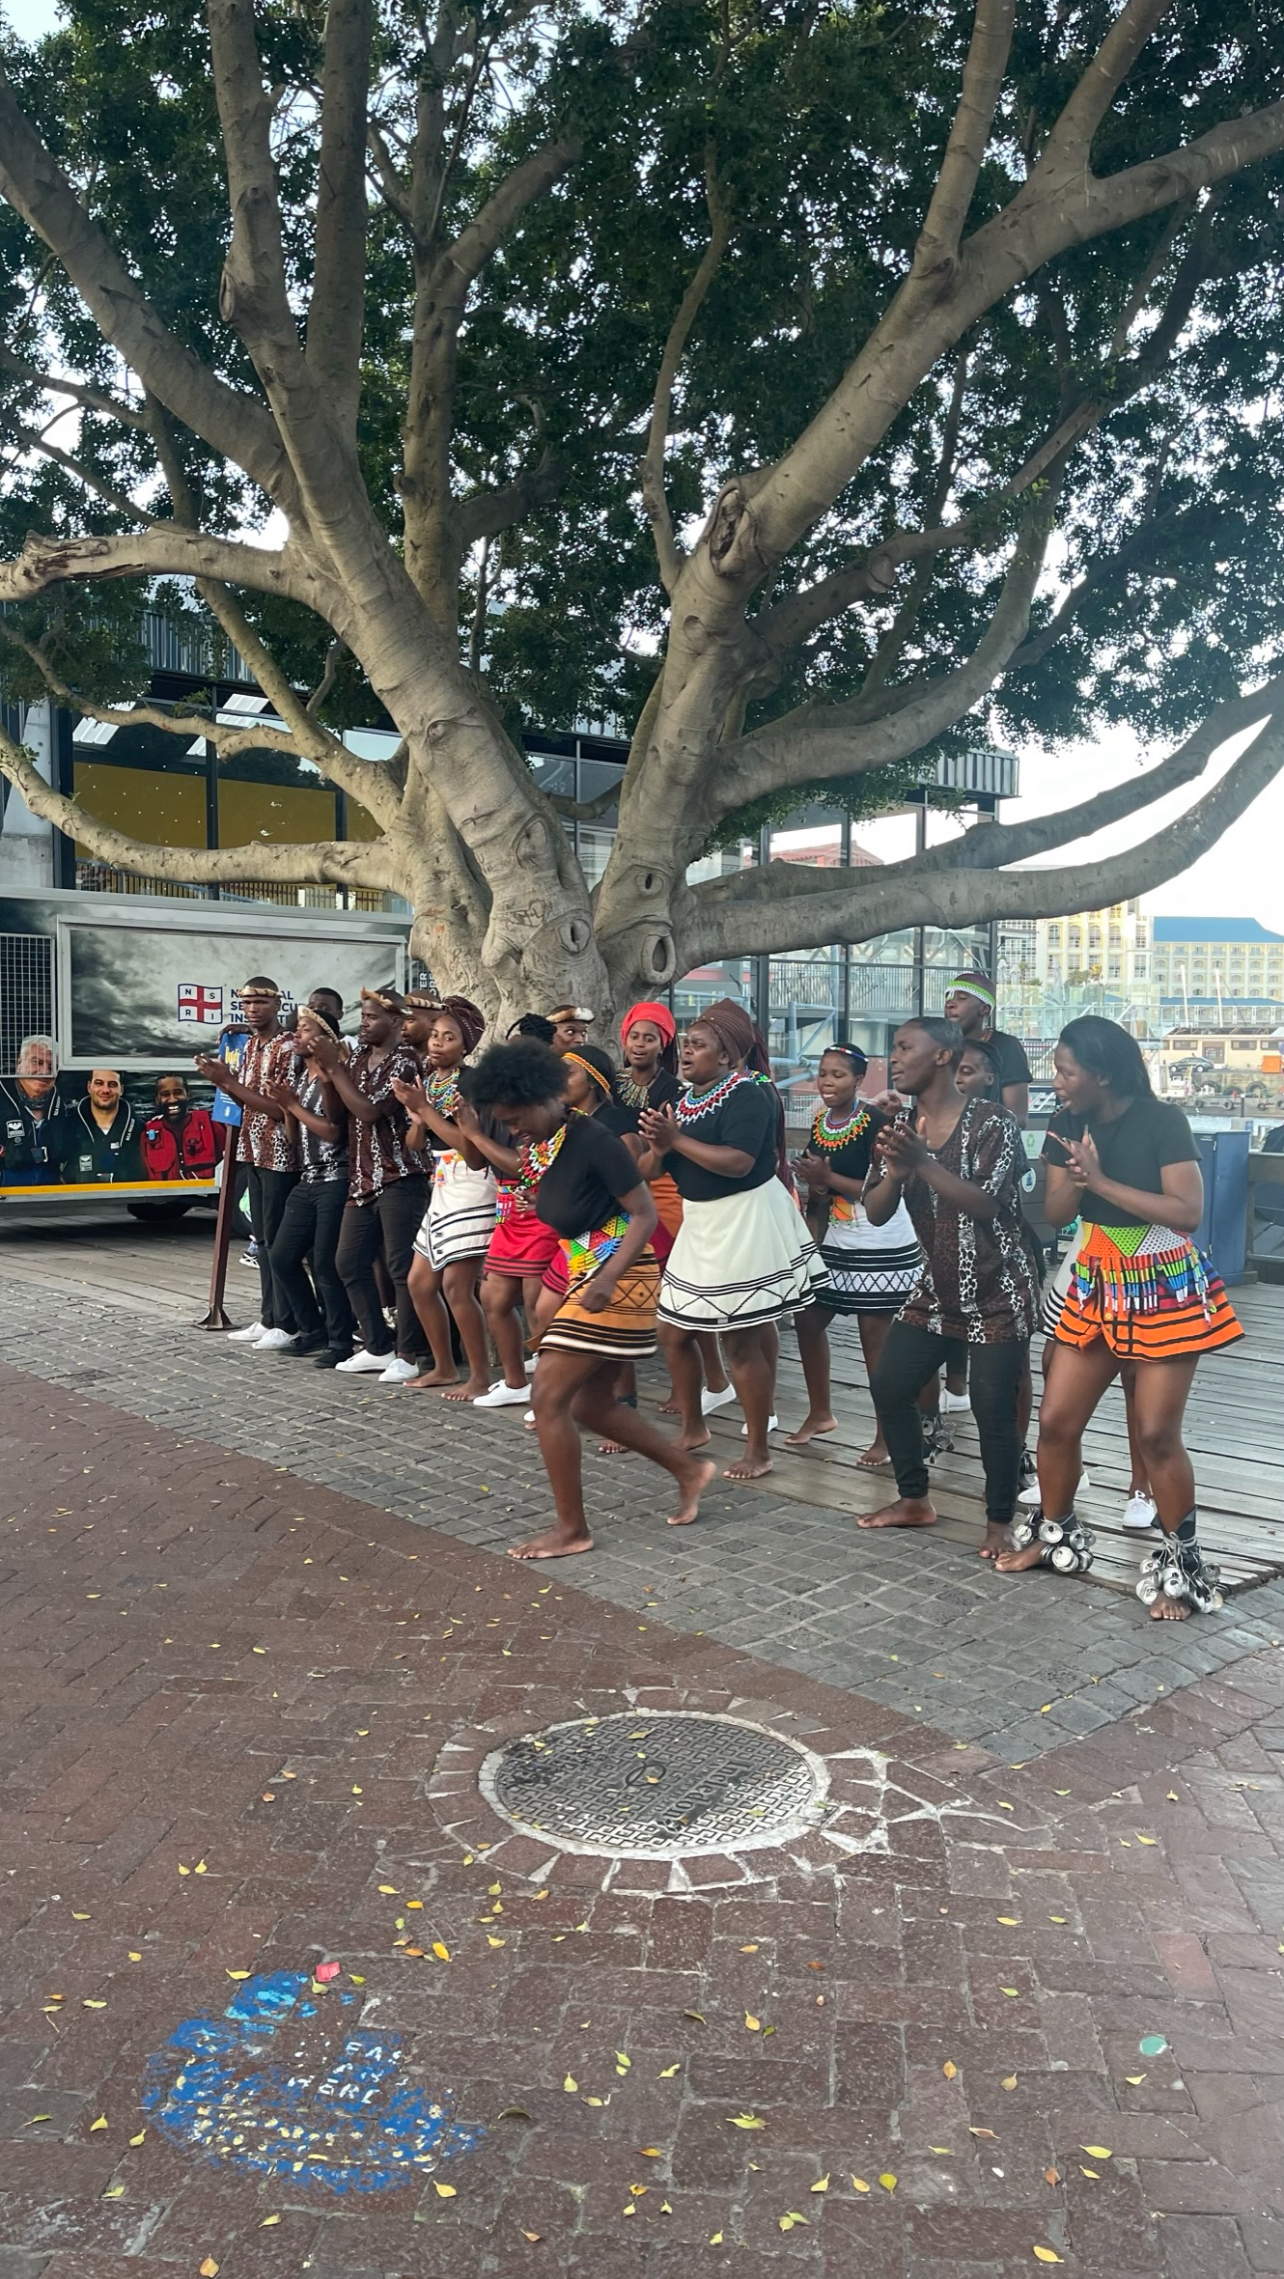 Saw a group performing traditional dances by the V&A waterfront in South Africa :)